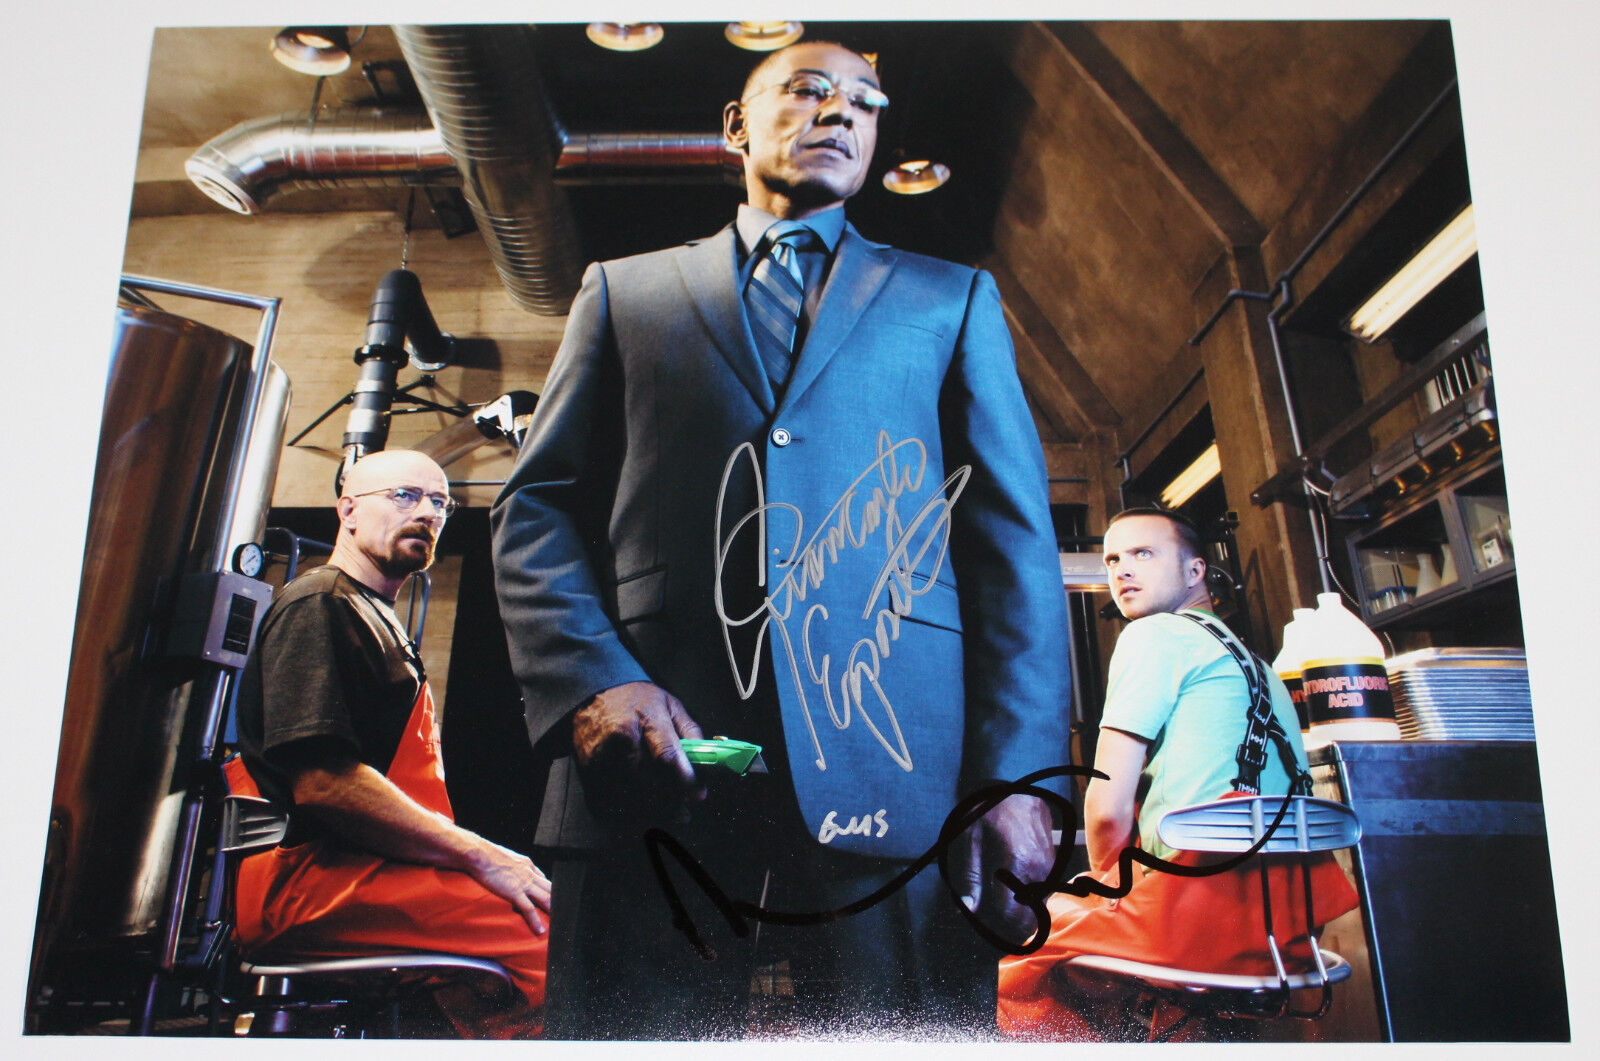 AARON PAUL & GIANCARLO ESPOSITO SIGNED AUTHENTIC 'BREAKING BAD' 11x14 Photo Poster painting COA!